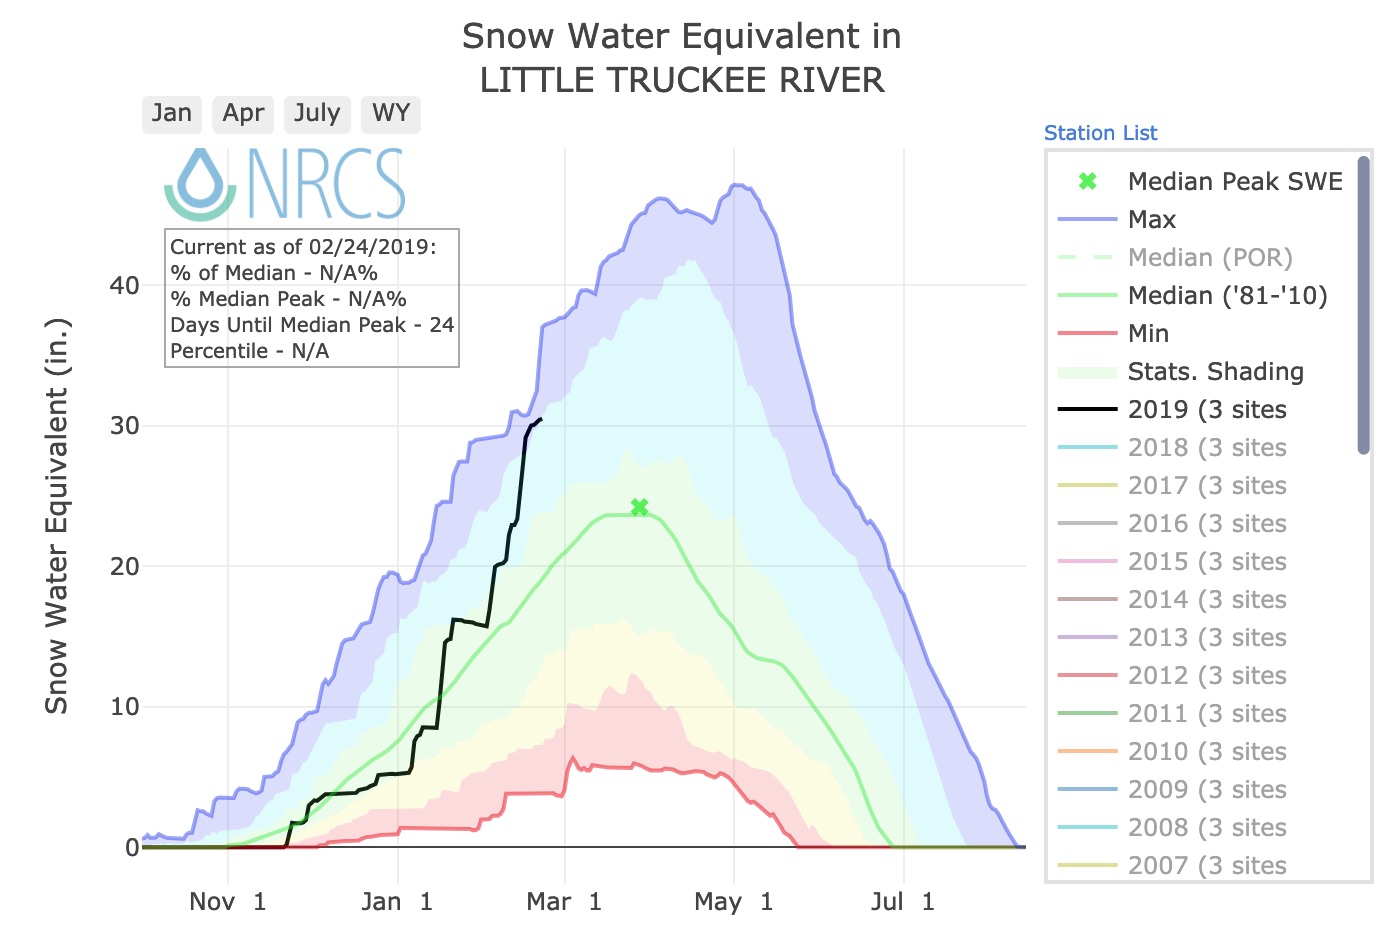 Snow To Water Ratio Chart